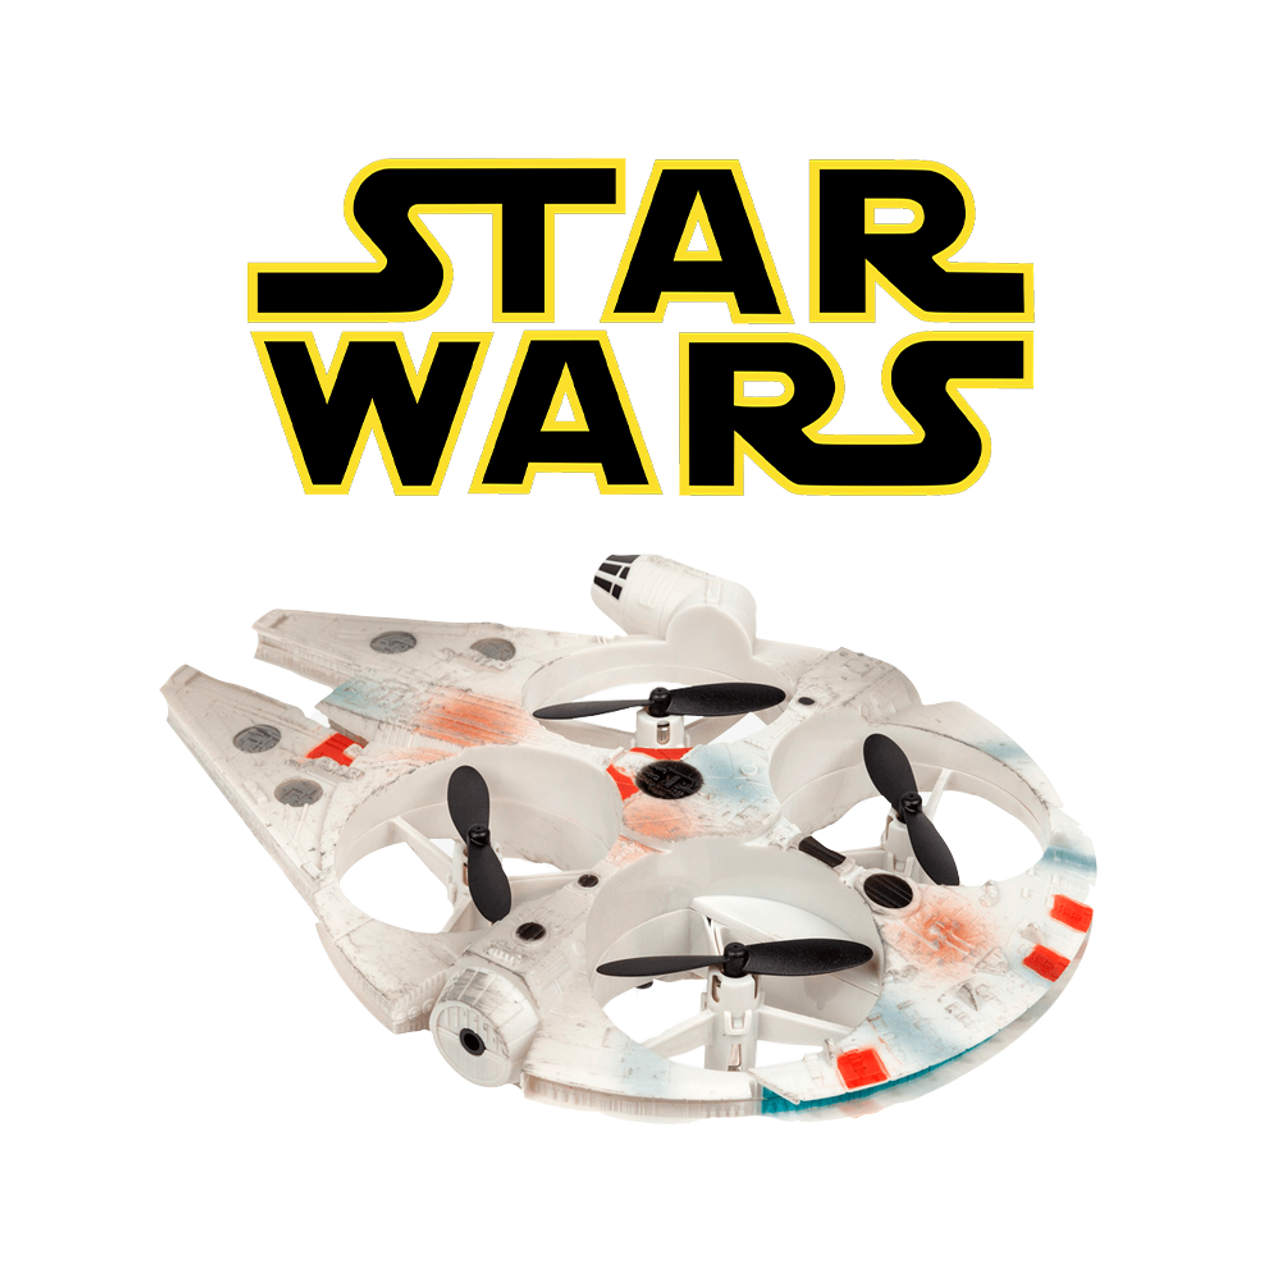 Star Wars® Millennium Drone with Motion-Sensing Hand Controls - Pick Your Plum